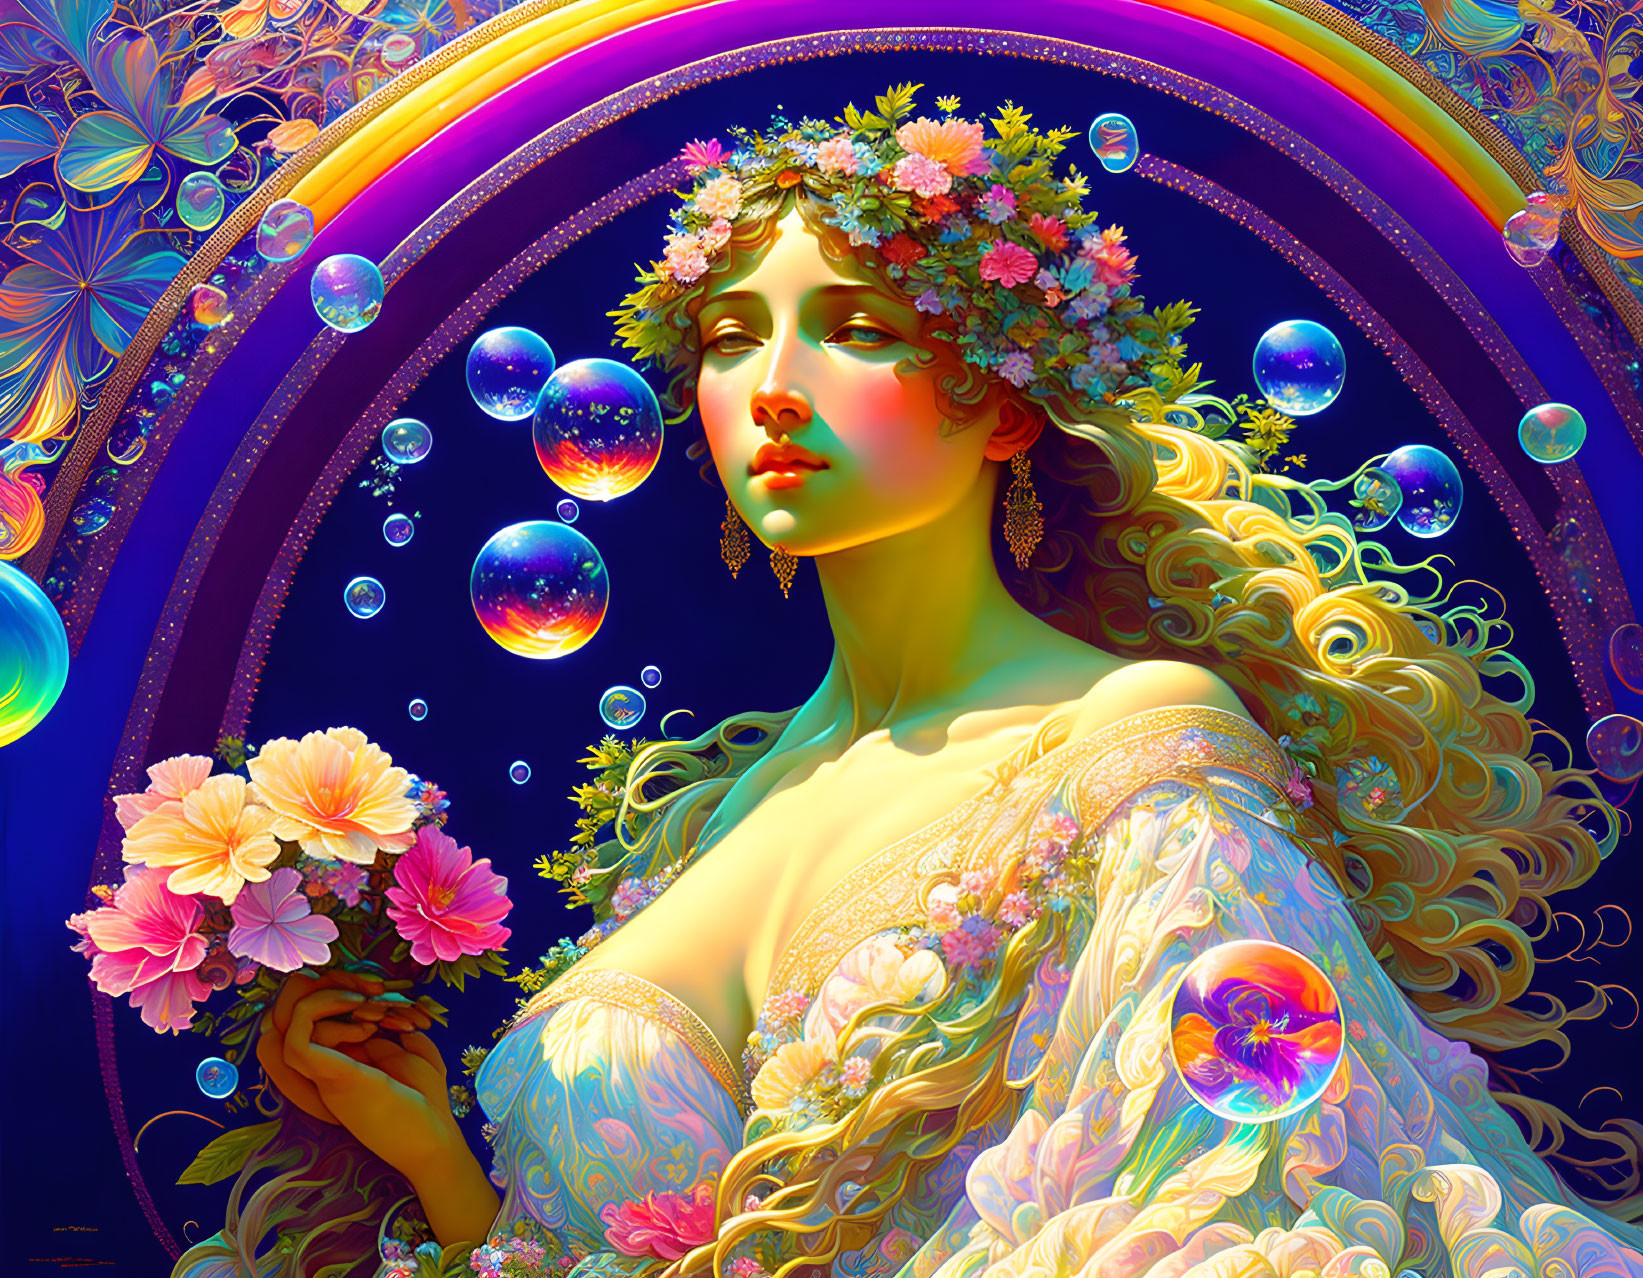 Colorful Woman with Floral Crown and Flower in Bubble-filled Scene